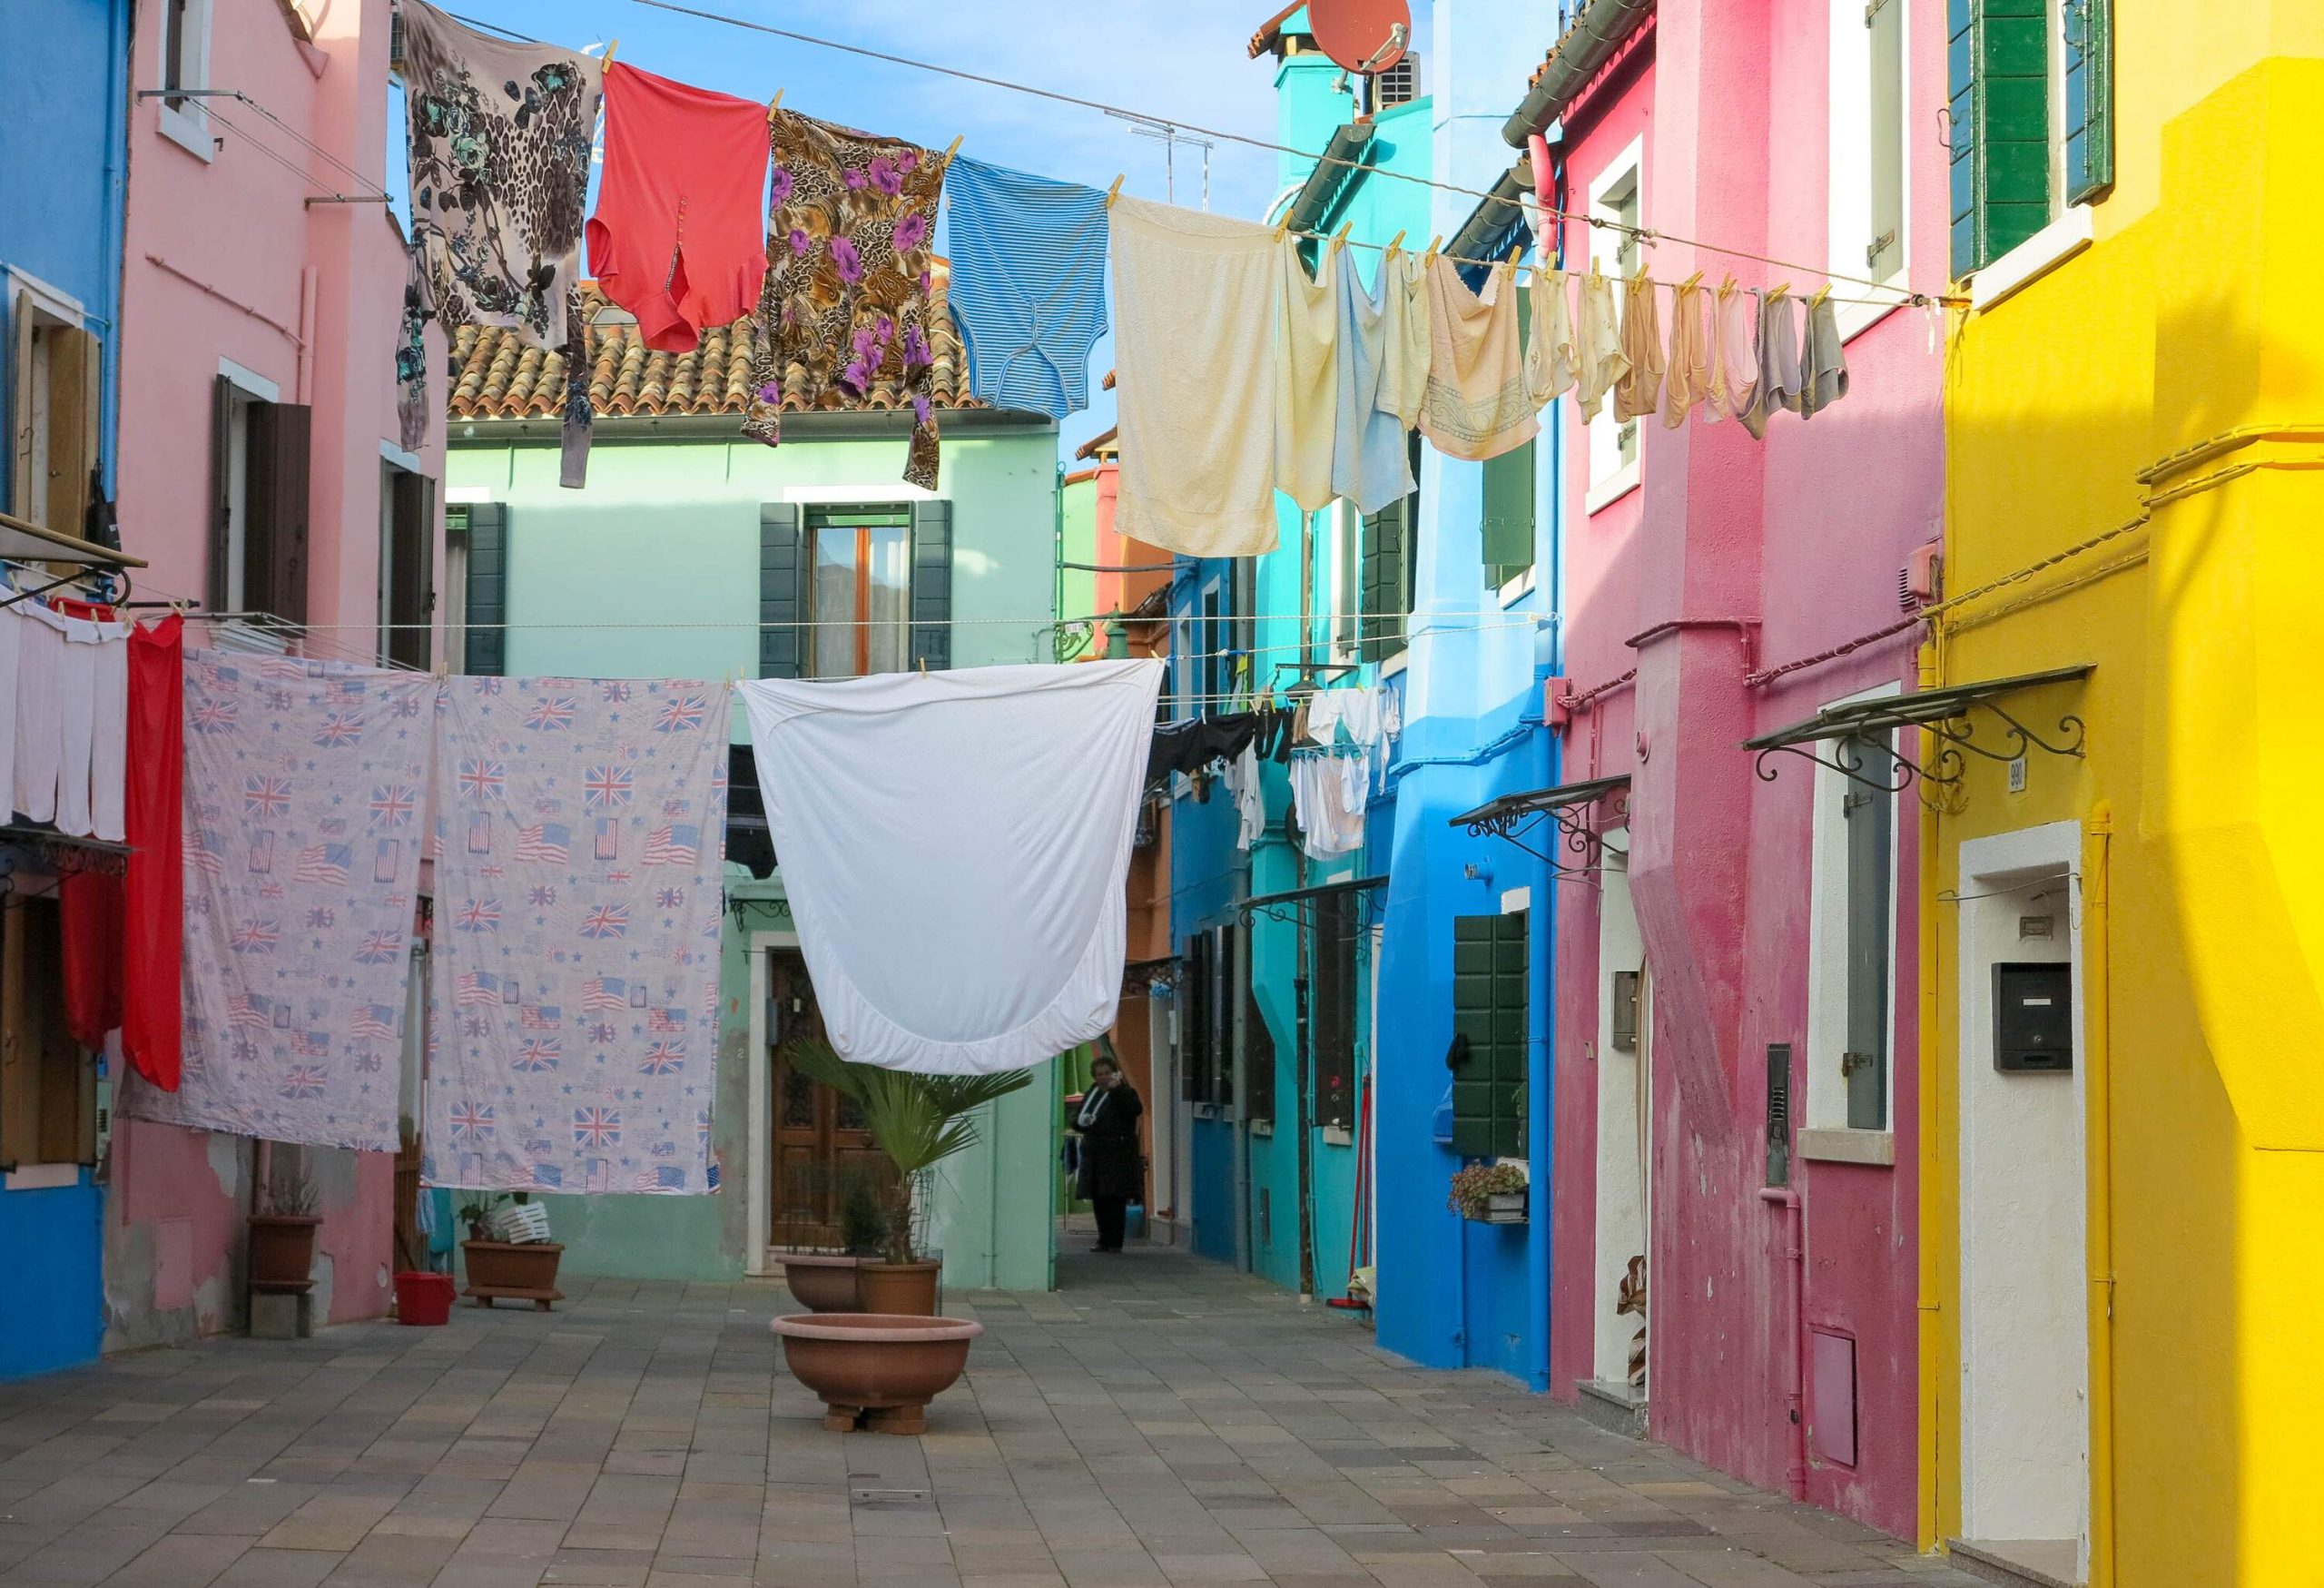 Laundry drying on the clothesline across the street bordered by pastel-coloured houses.